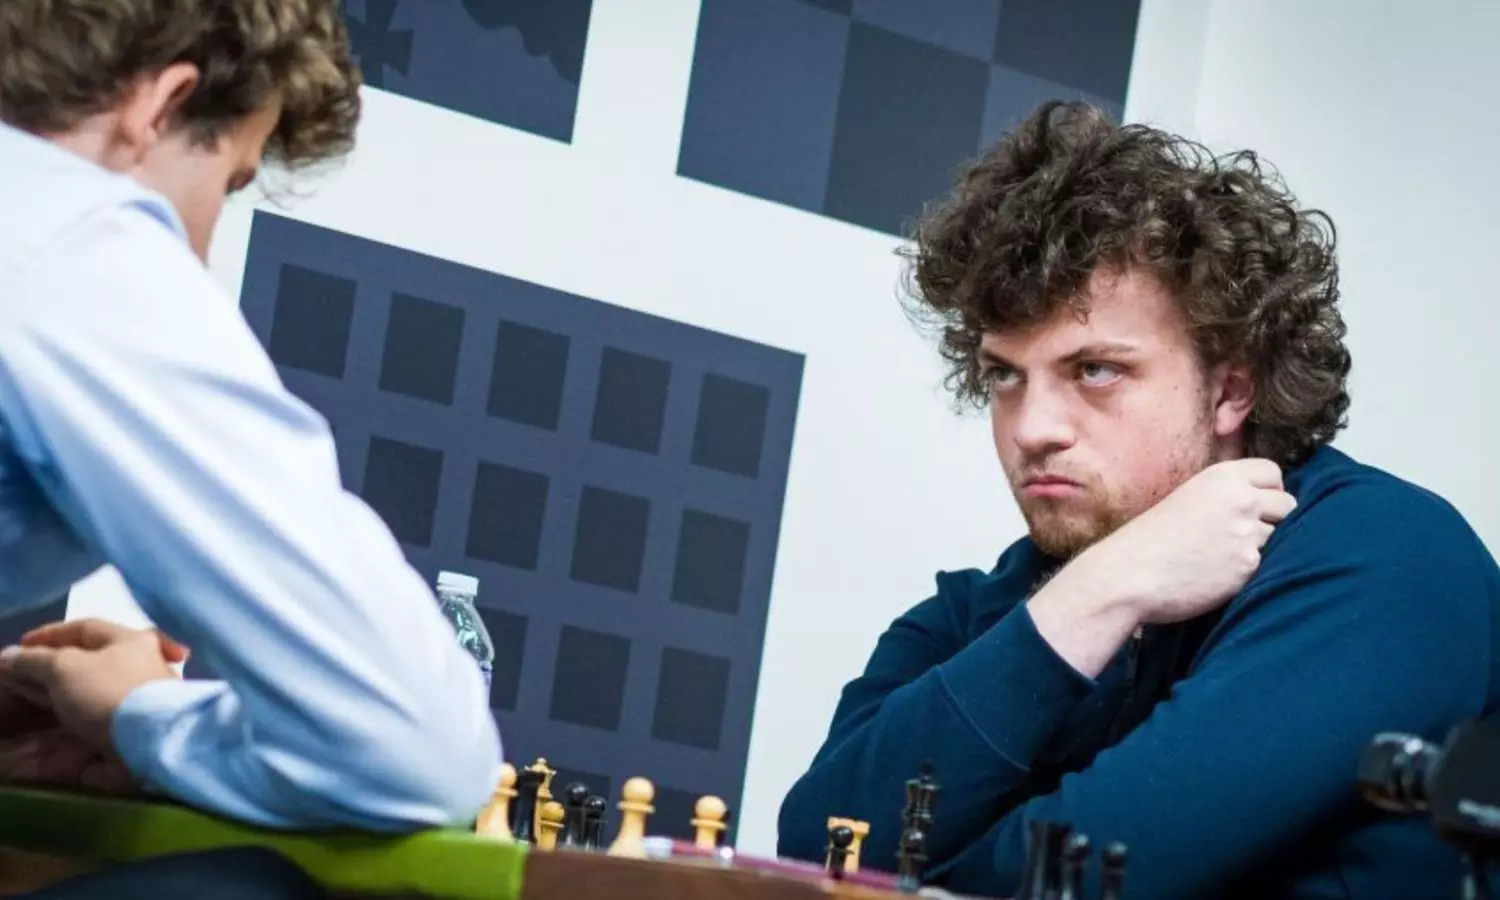 Expensive gambit: U.S. chess master Hans Moke Niemann sues world champ over  cheating charges - Washington Times